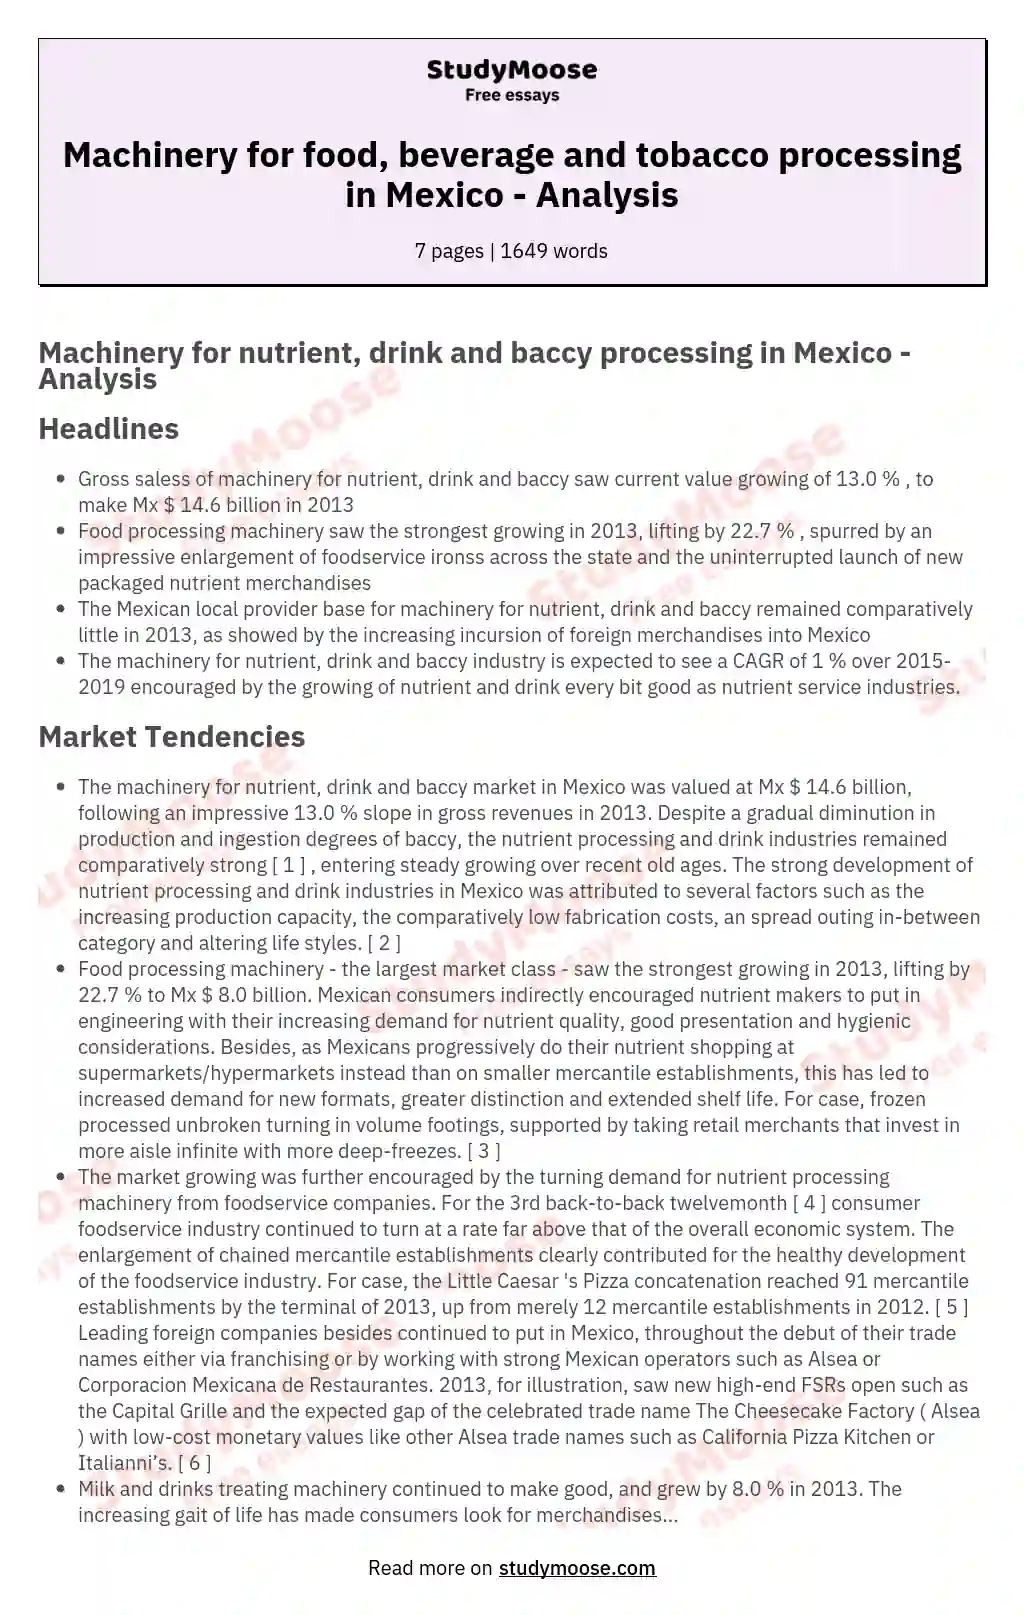 Machinery for food, beverage and tobacco processing in Mexico - Analysis